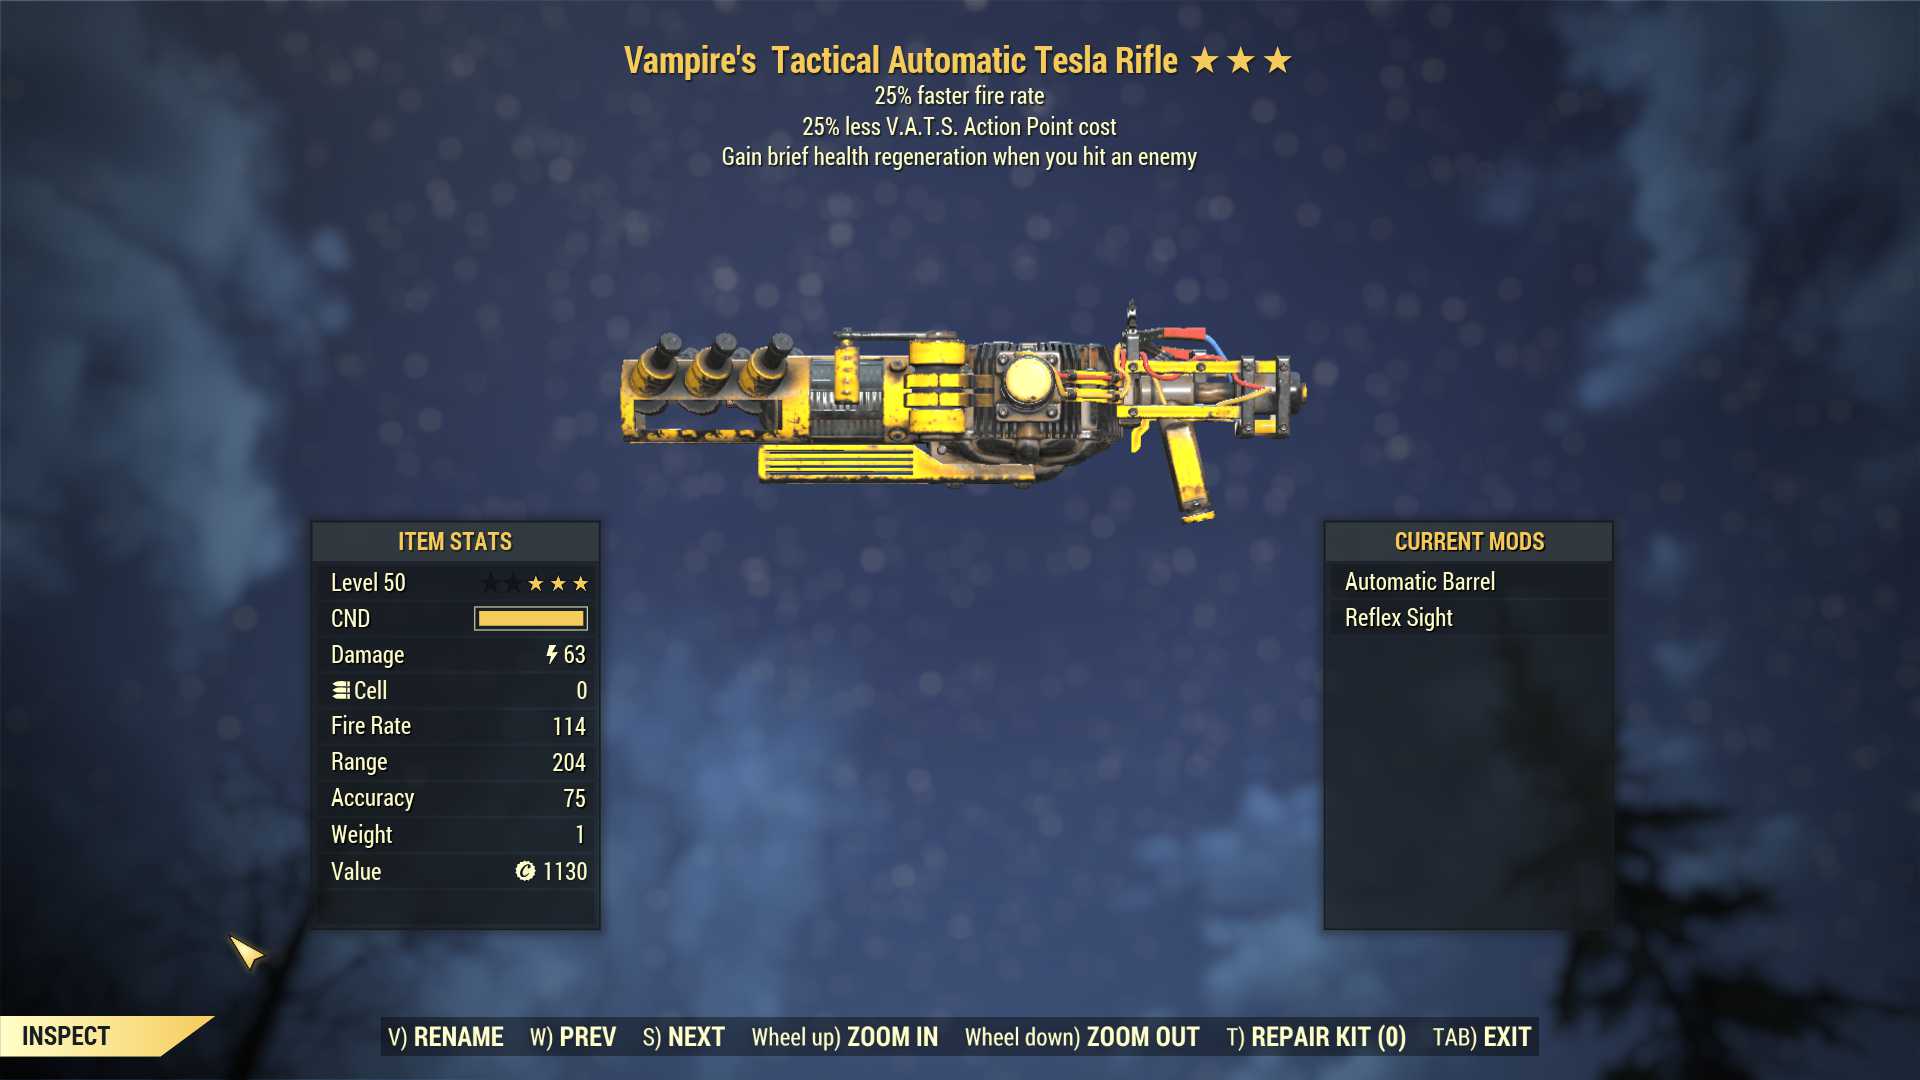 Vampire's Tesla rifle (25% faster fire rate, 25% less VATS AP cost)